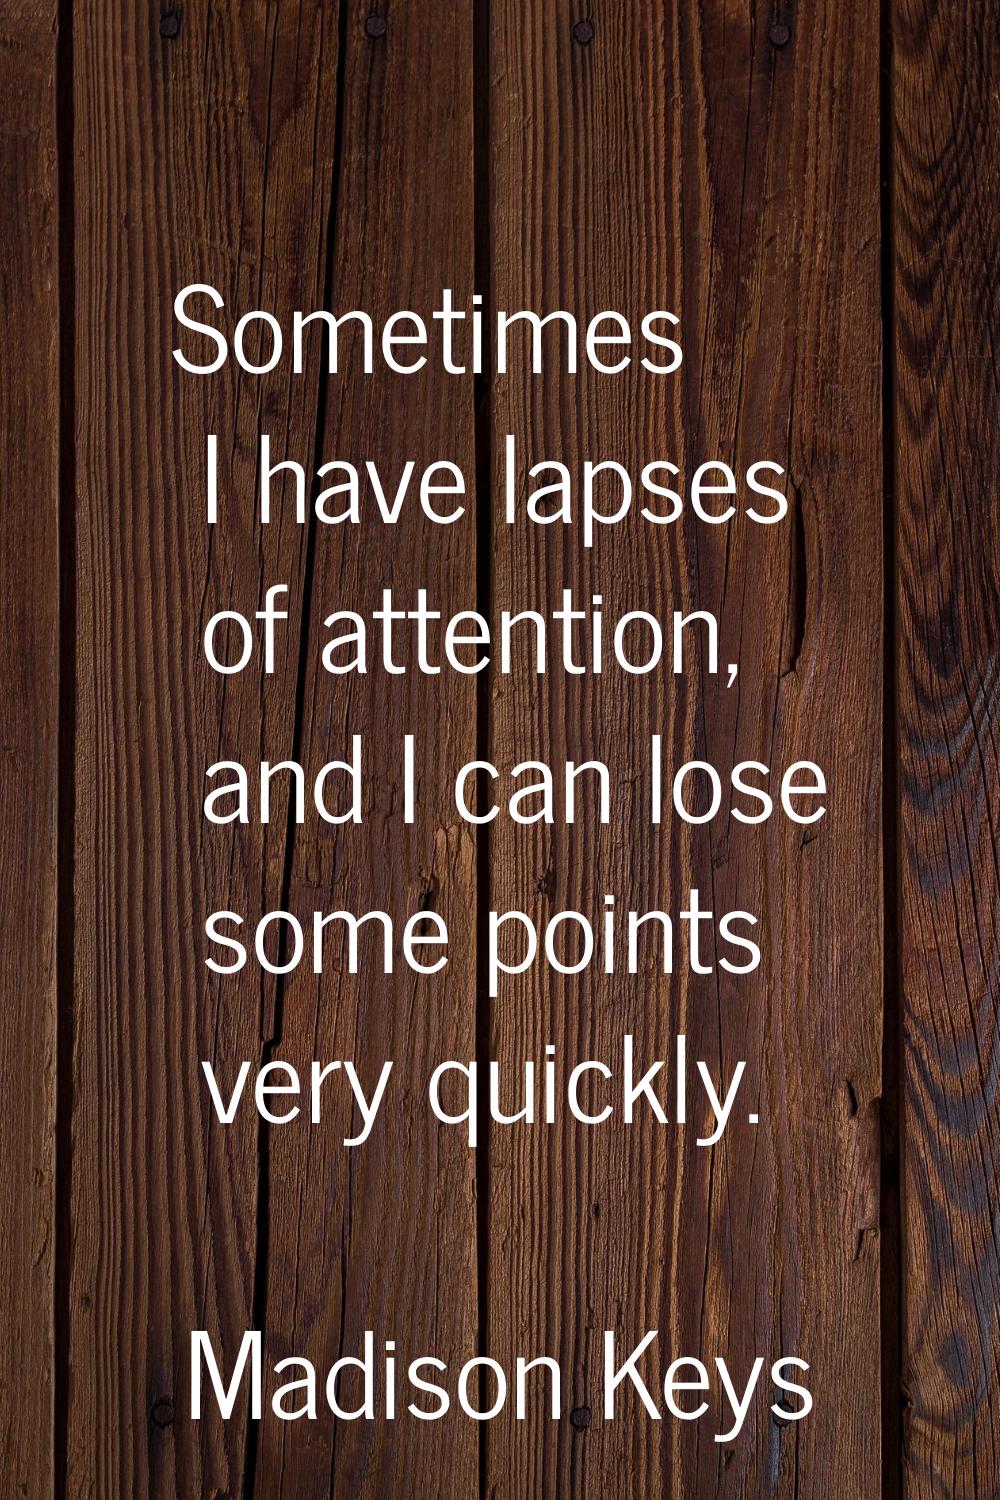 Sometimes I have lapses of attention, and I can lose some points very quickly.